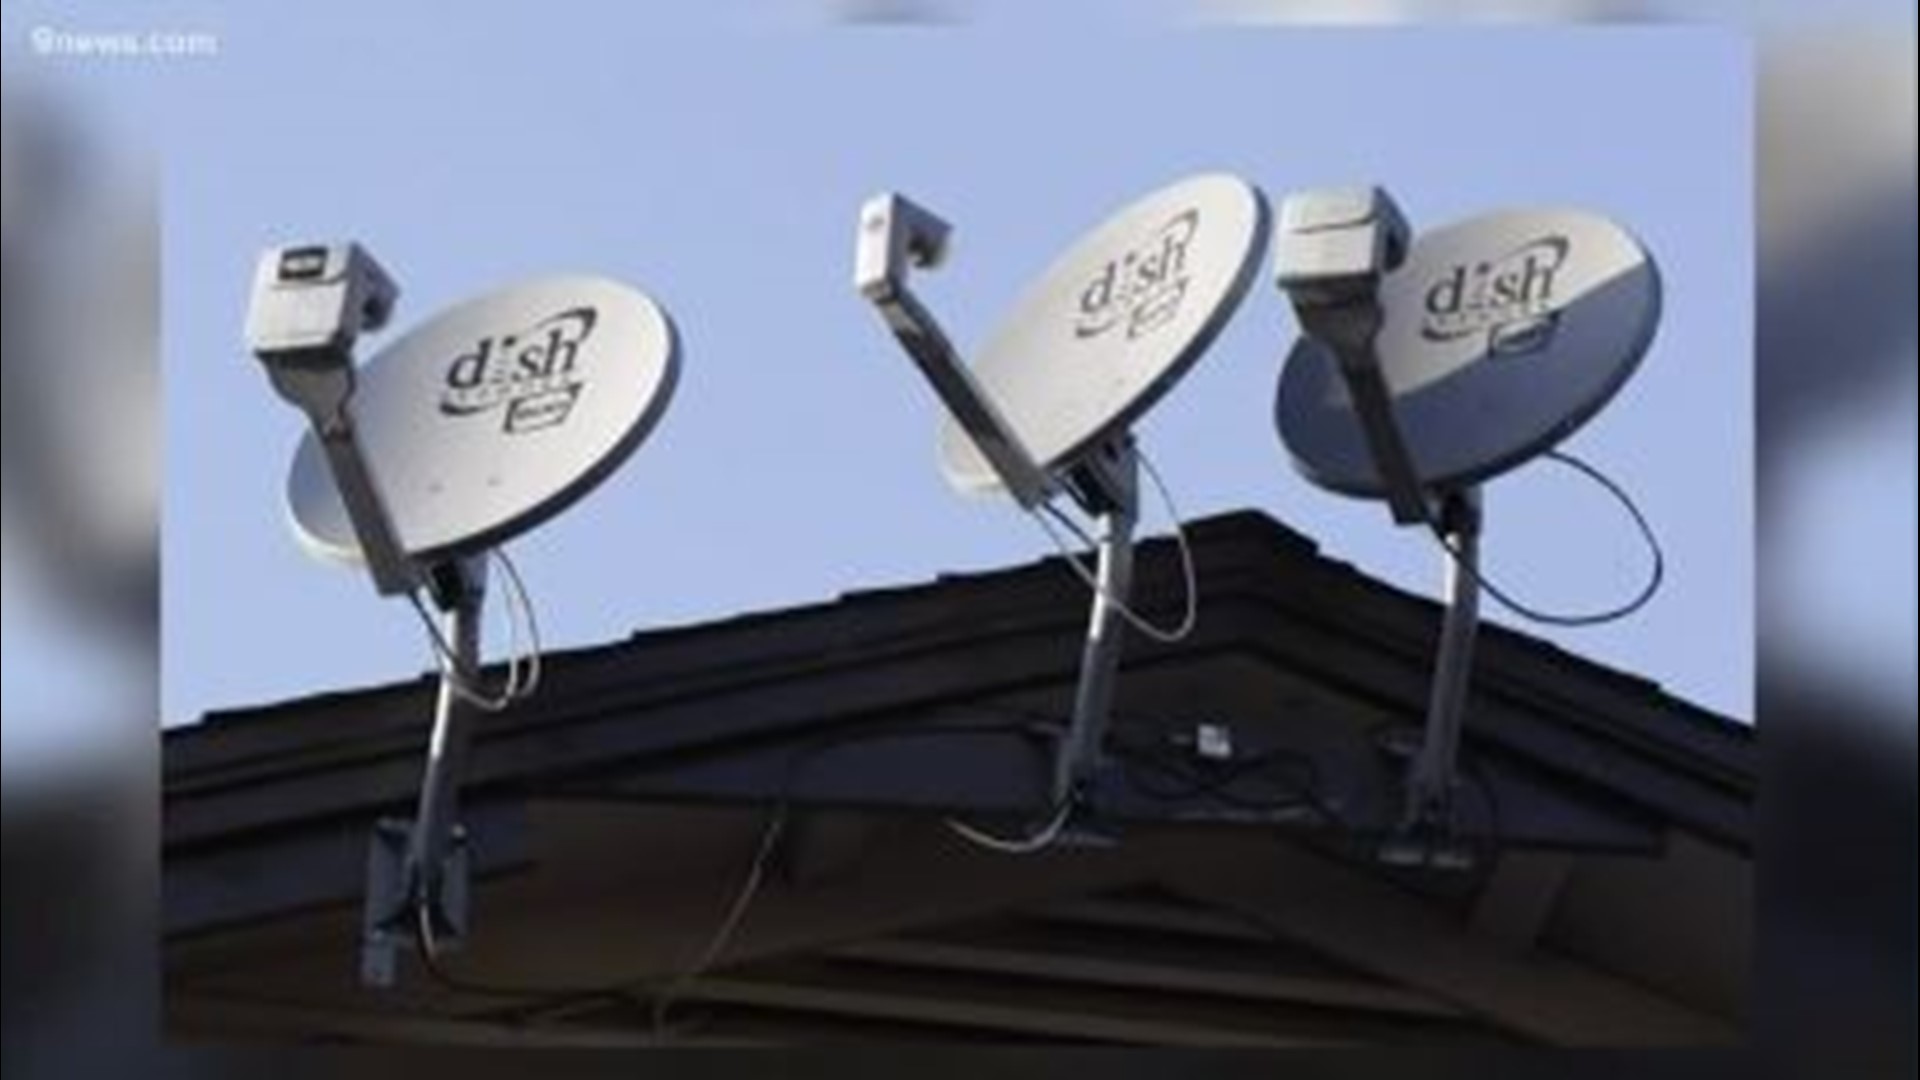 Colorado will be among the first ten states where Dish plans to deploy 5G broadband services by 2023.